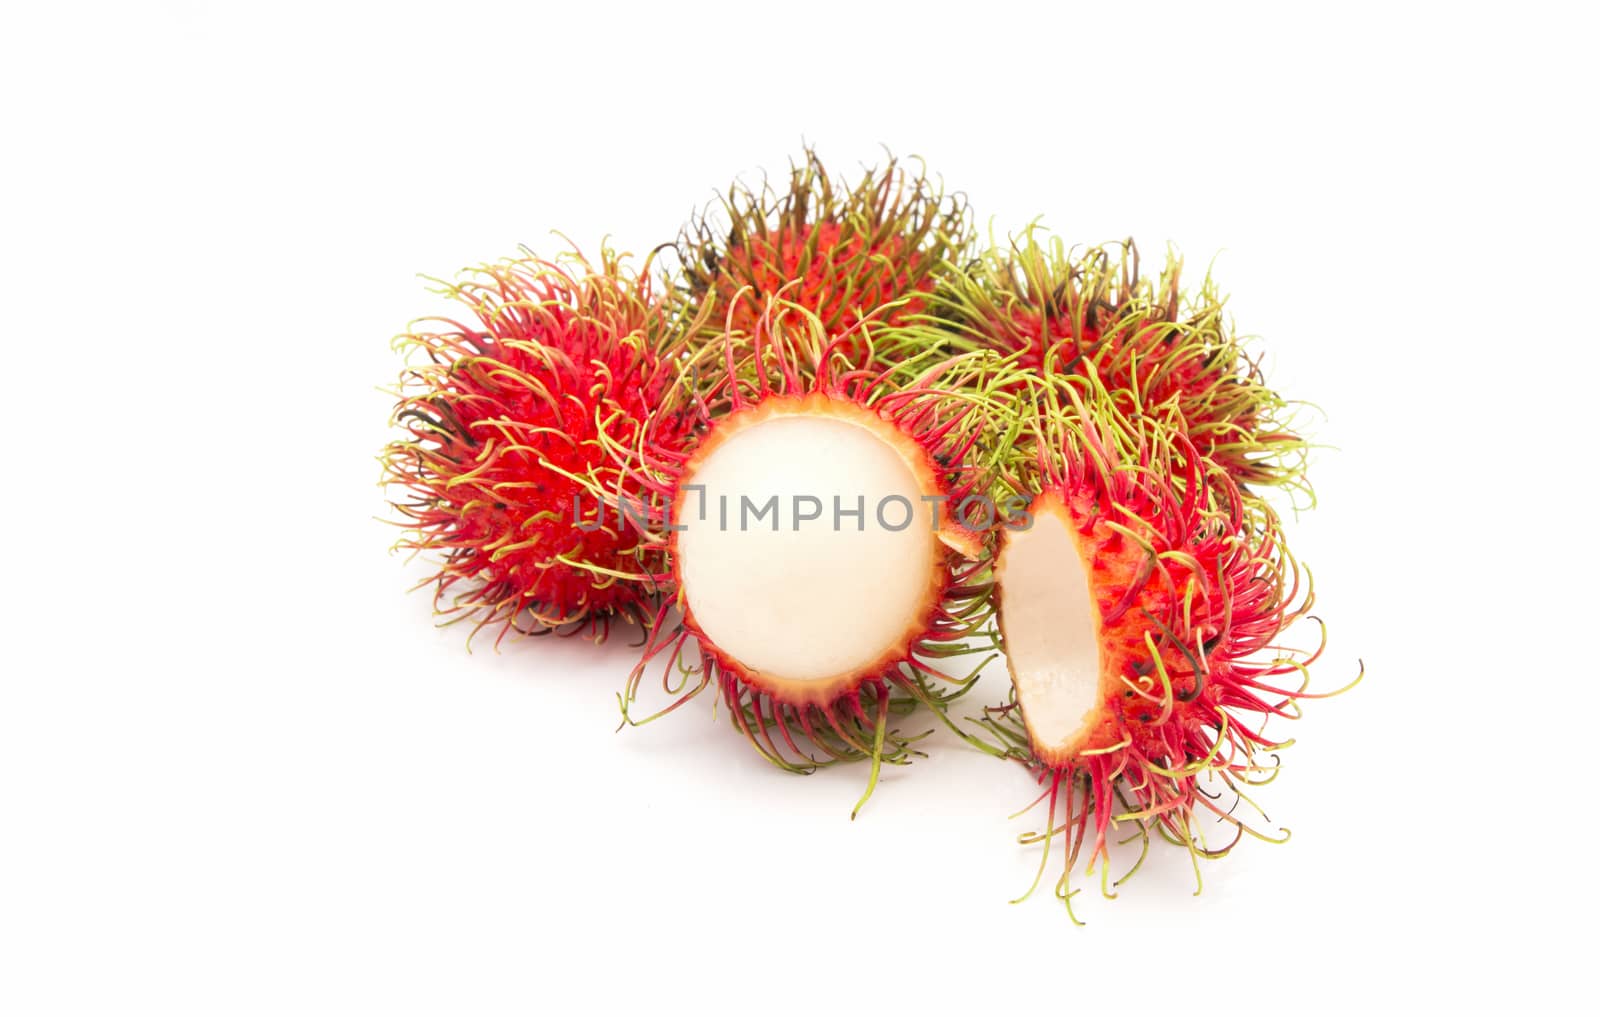 Rambutan fruit with red shell  on white background